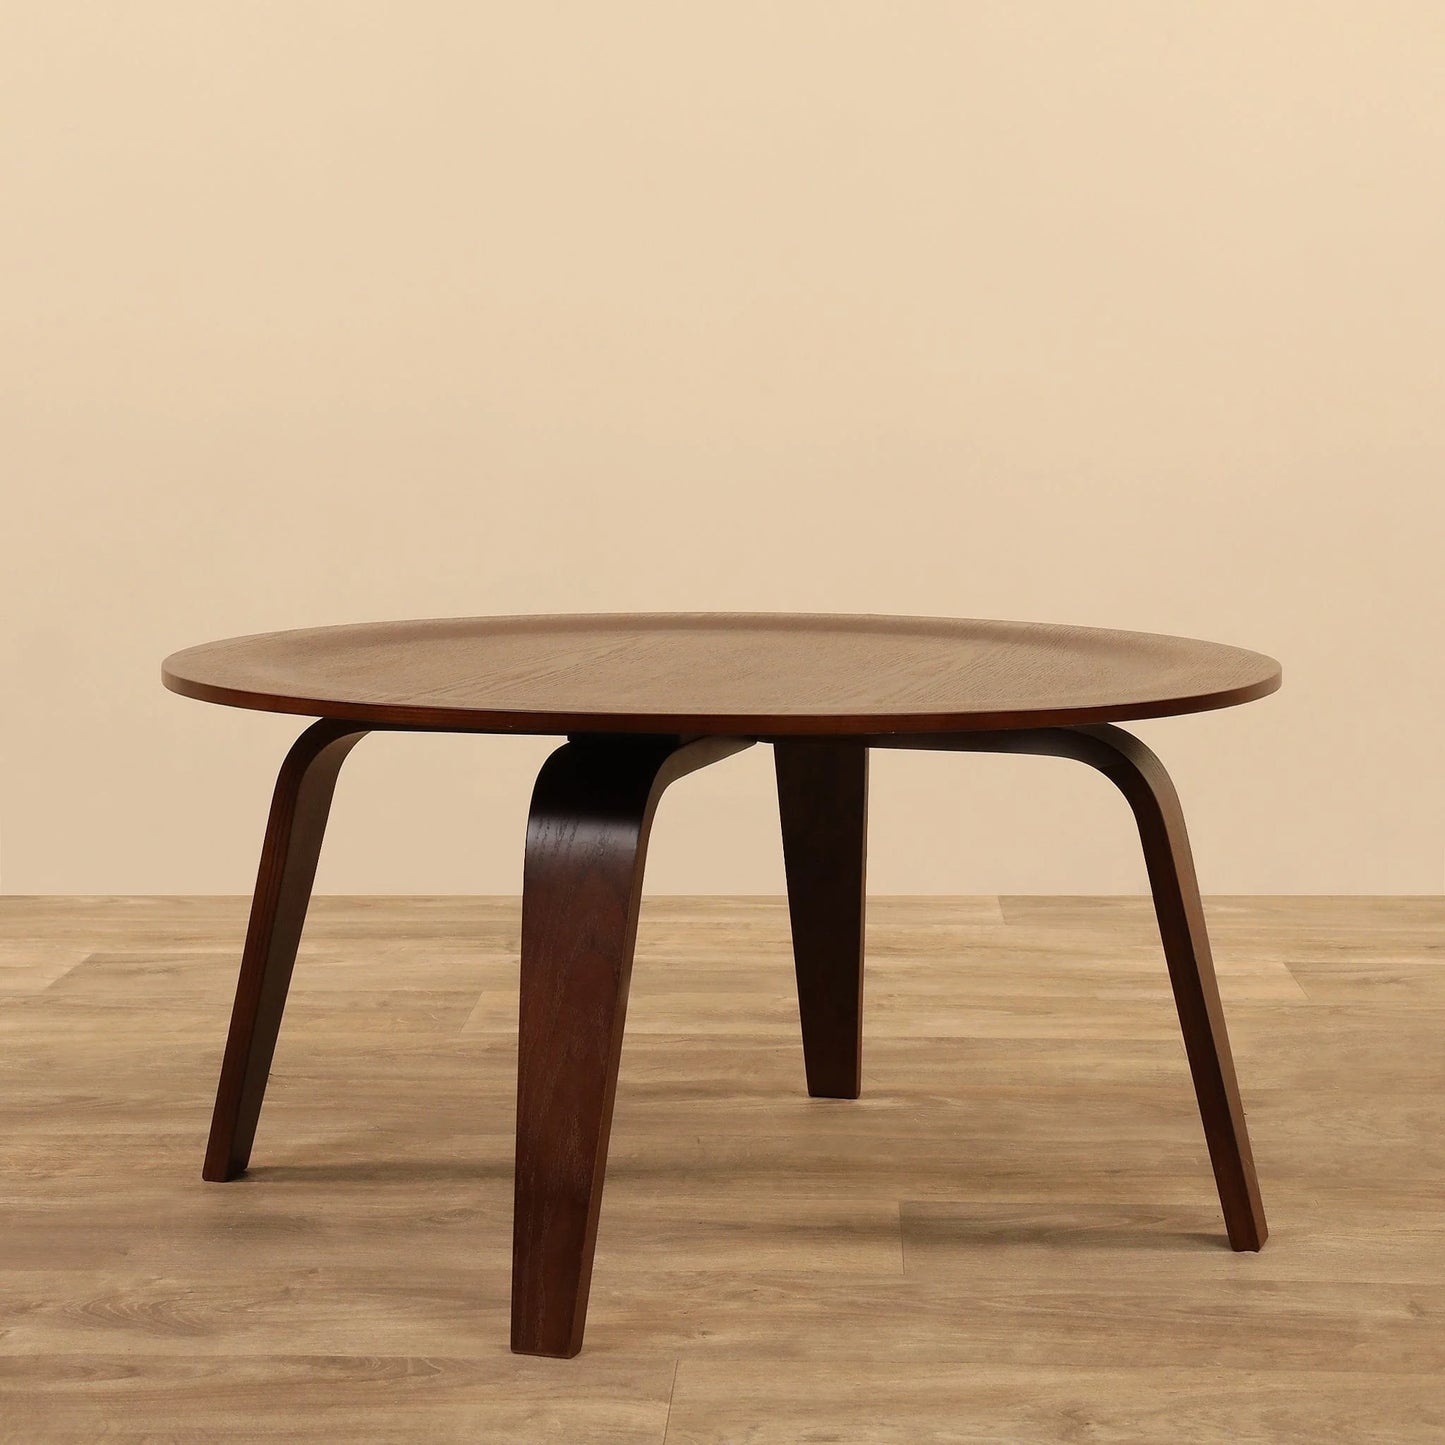 Replica Charles Eames Round Coffee Table